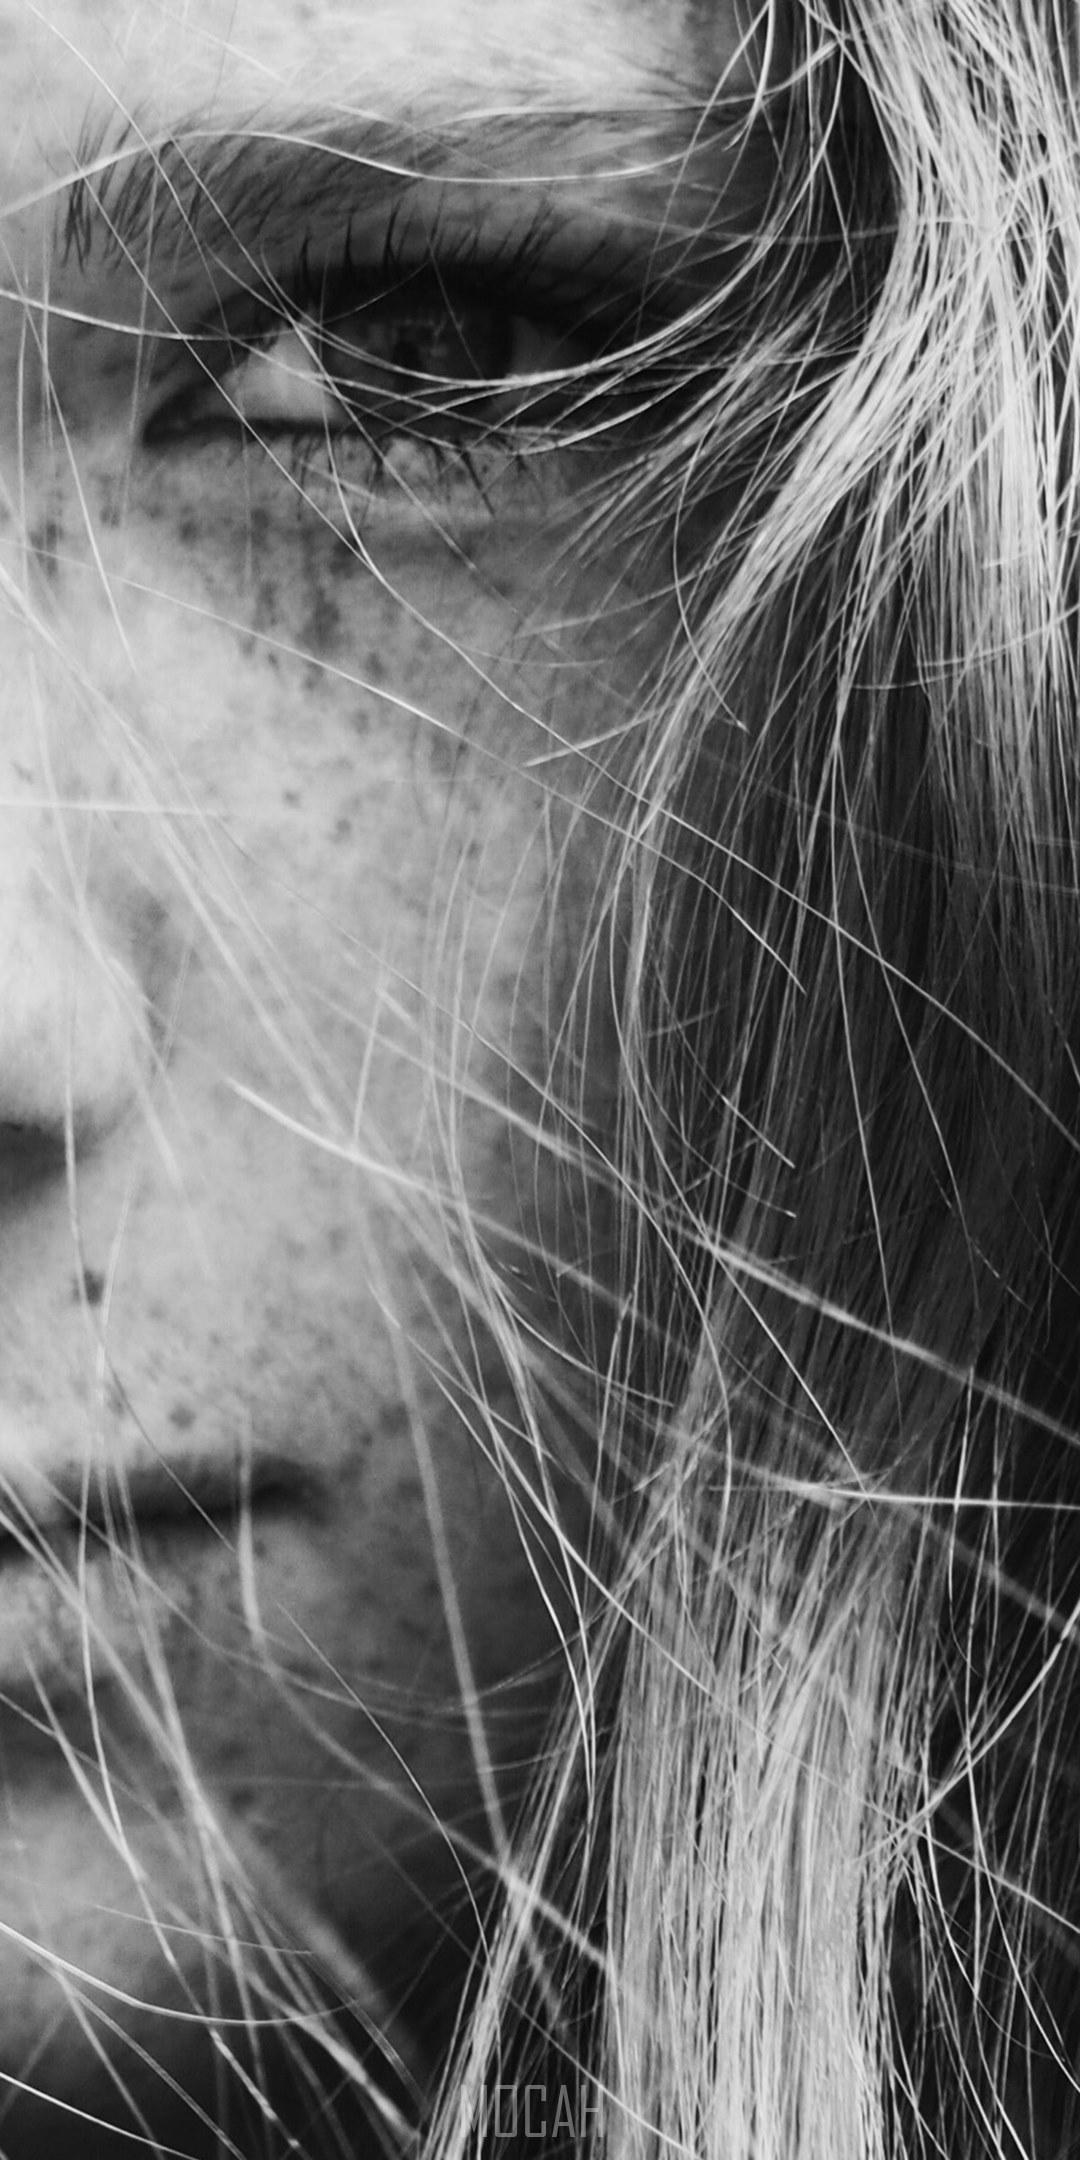 HD wallpaper, Xiaomi Mi A2 Hd Download, 1080X2160, Freckles On Dutch Girl Face, Black And White Close Up Shot Of Young Female Face With Freckles In Amsterdam